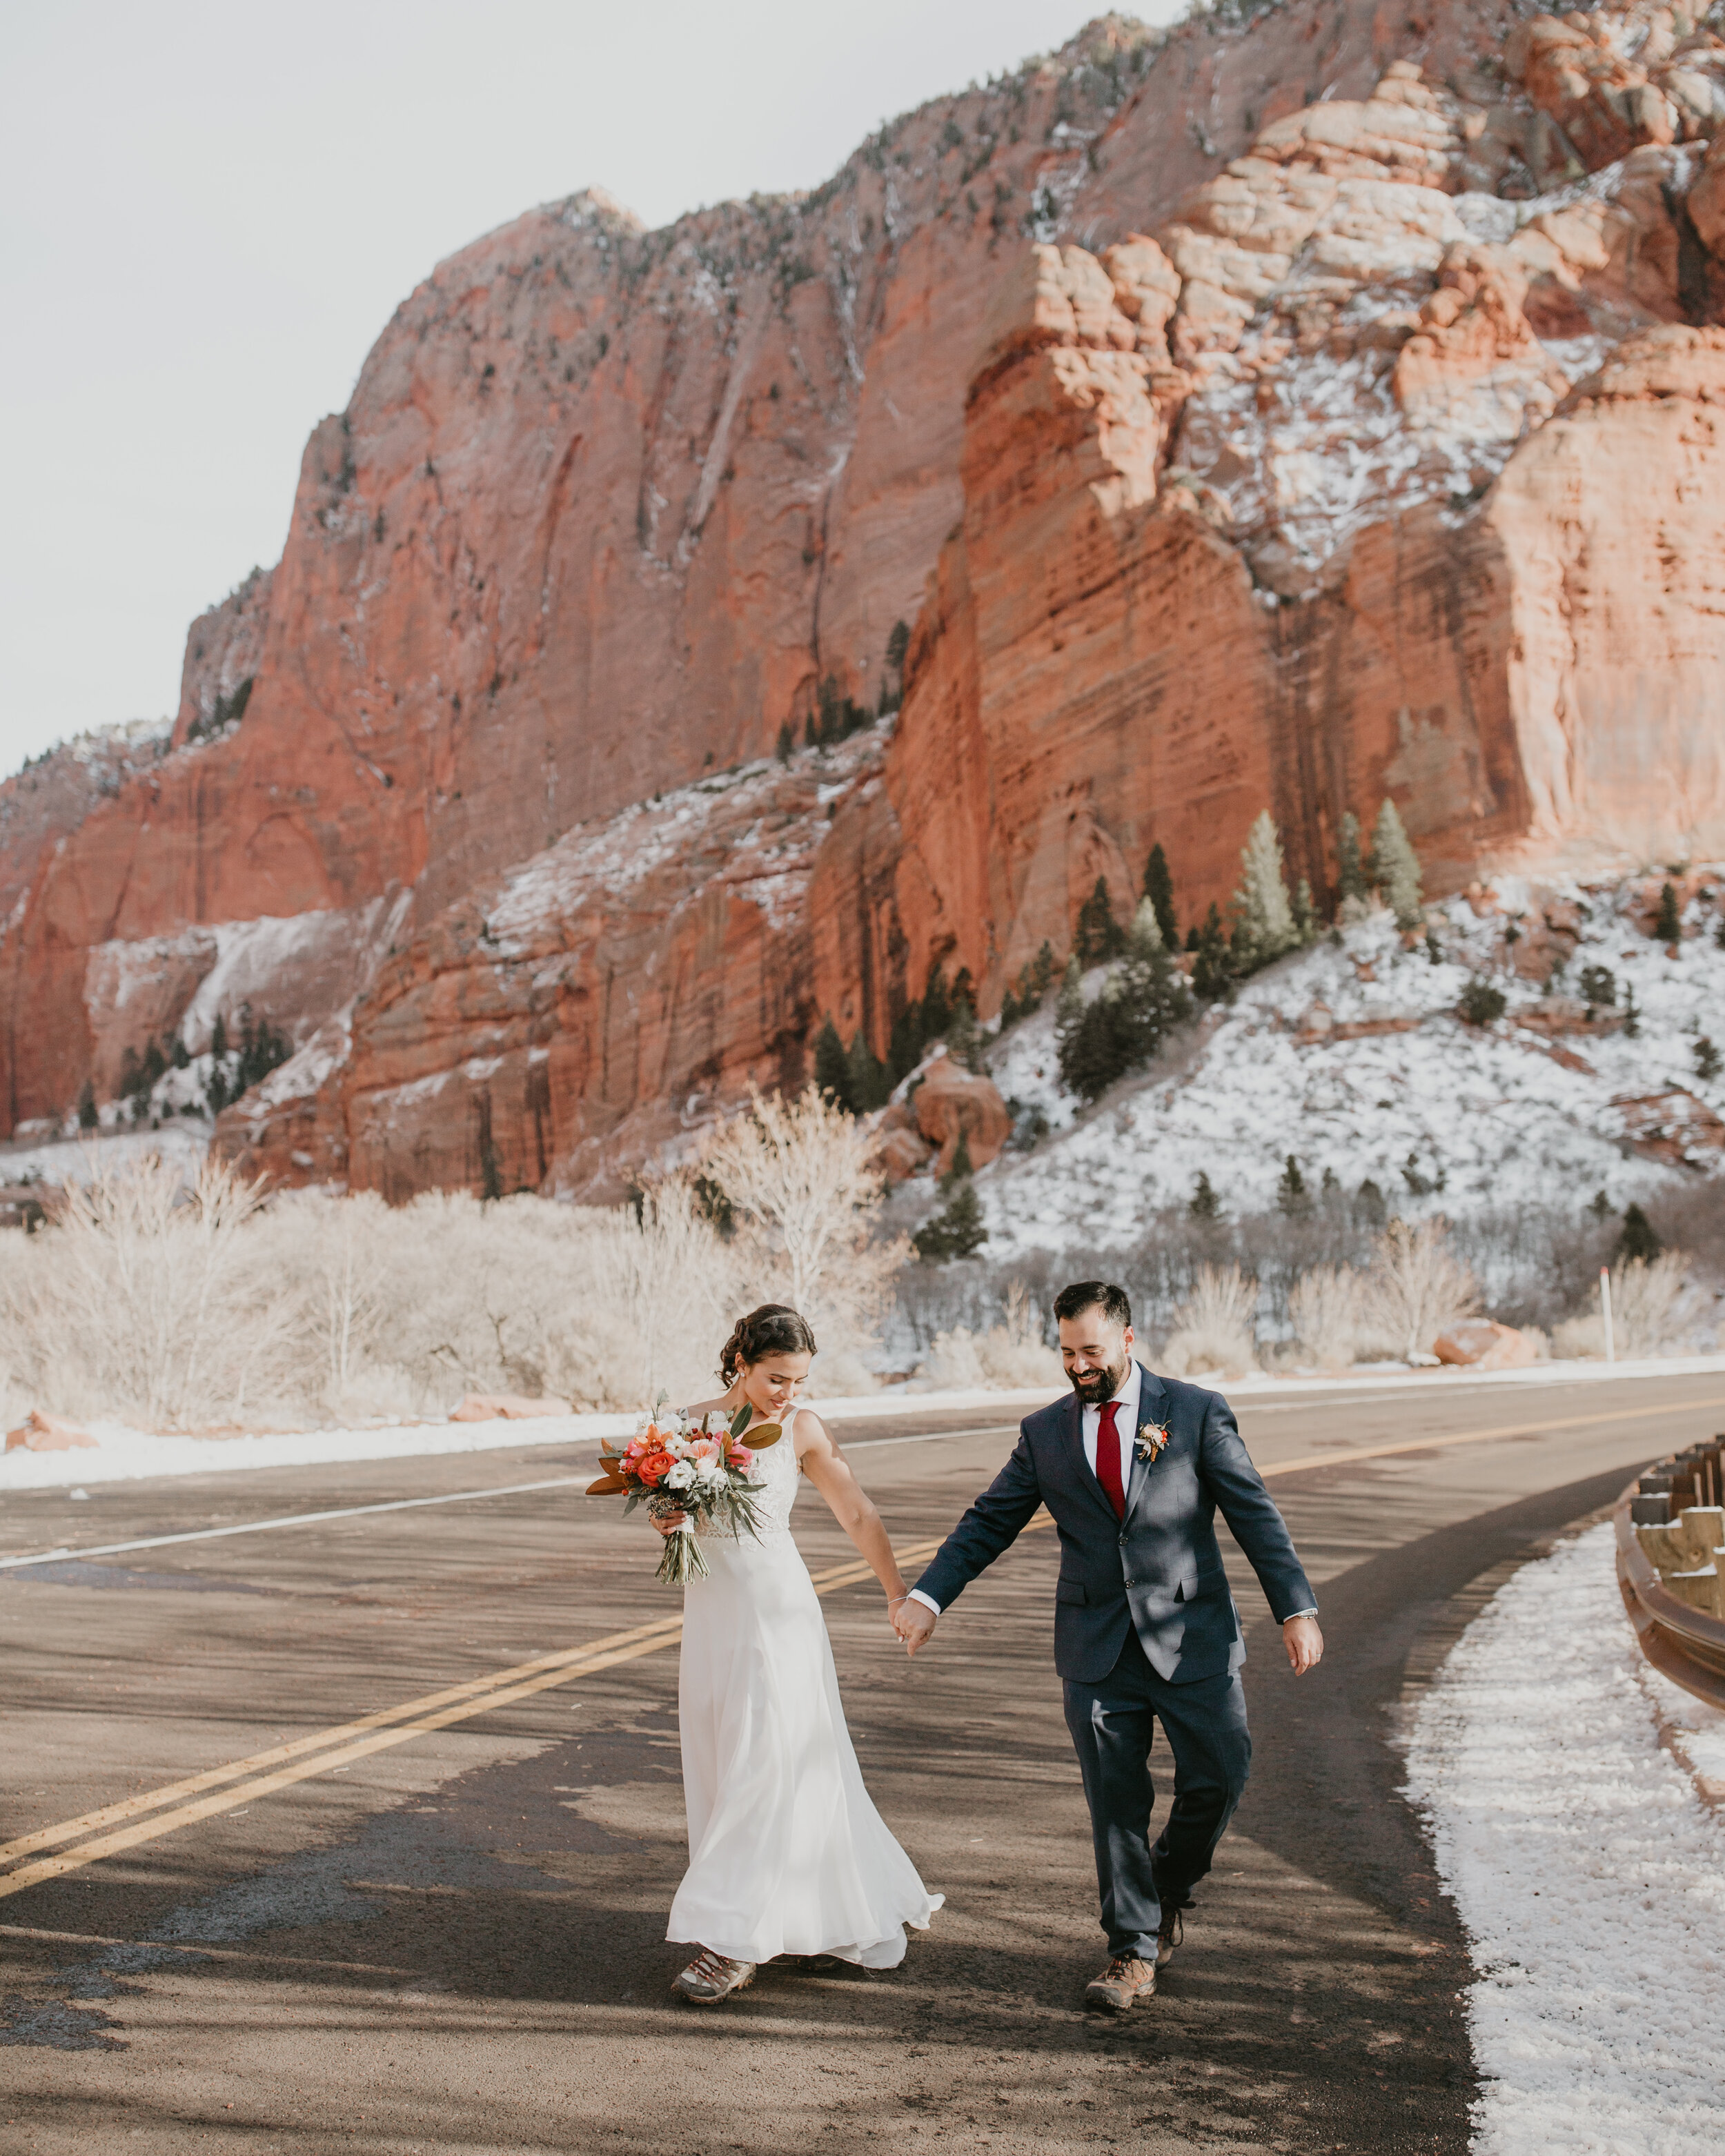 Nicole-Daacke-Photography-snowy-hiking-elopement-in-zion-national-park-zion-elopement-photographer-canyon-overlook-trial-brial-portraits-in-mt-zion-national-park-utah-desert-adventure-elopement-photographer-133.jpg